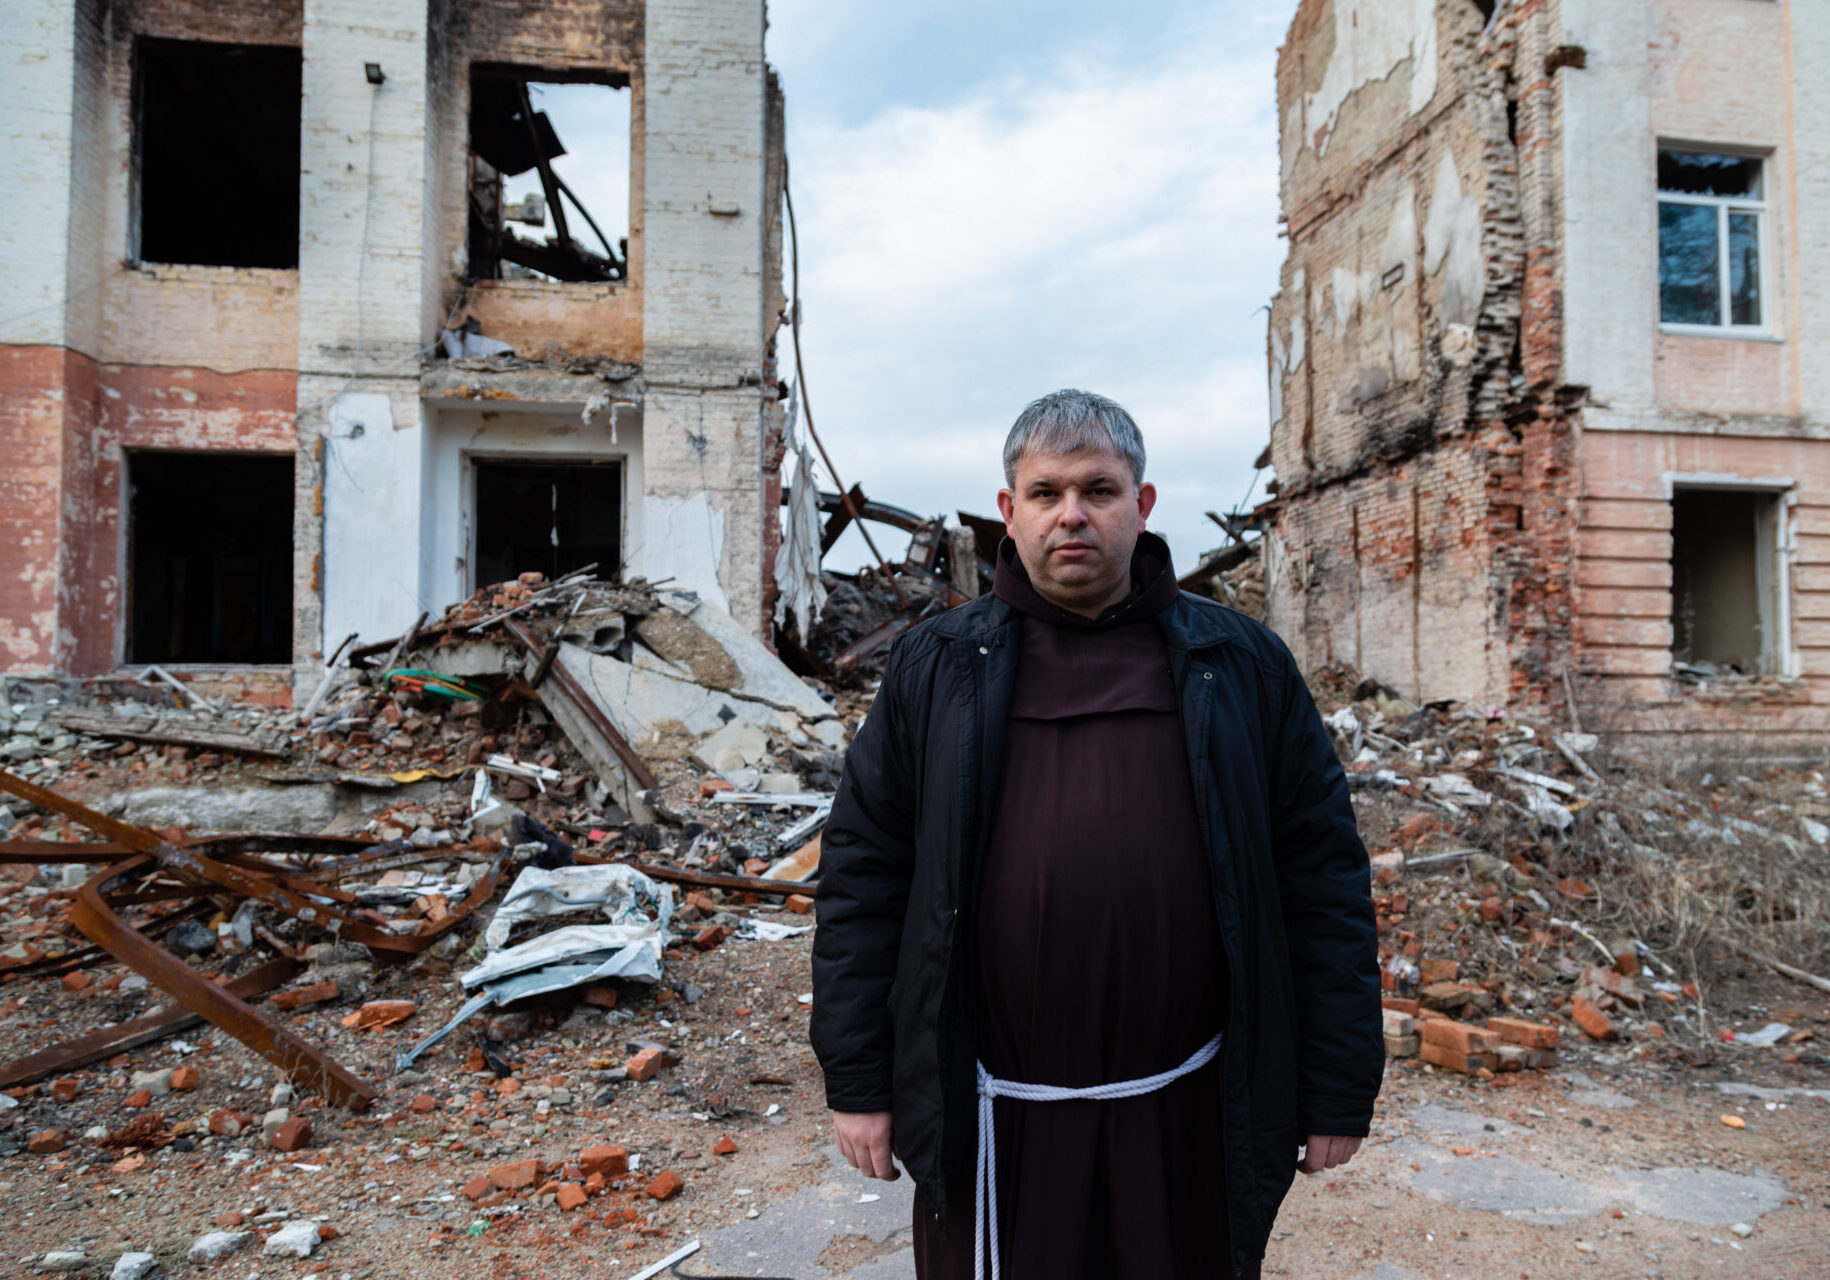 Priest Peter stands near the house destroyed by Russian troops in the city of Zhytomyr. In March 2022, the city of Zhytomyr suffered missile and air strikes from the Russian military.